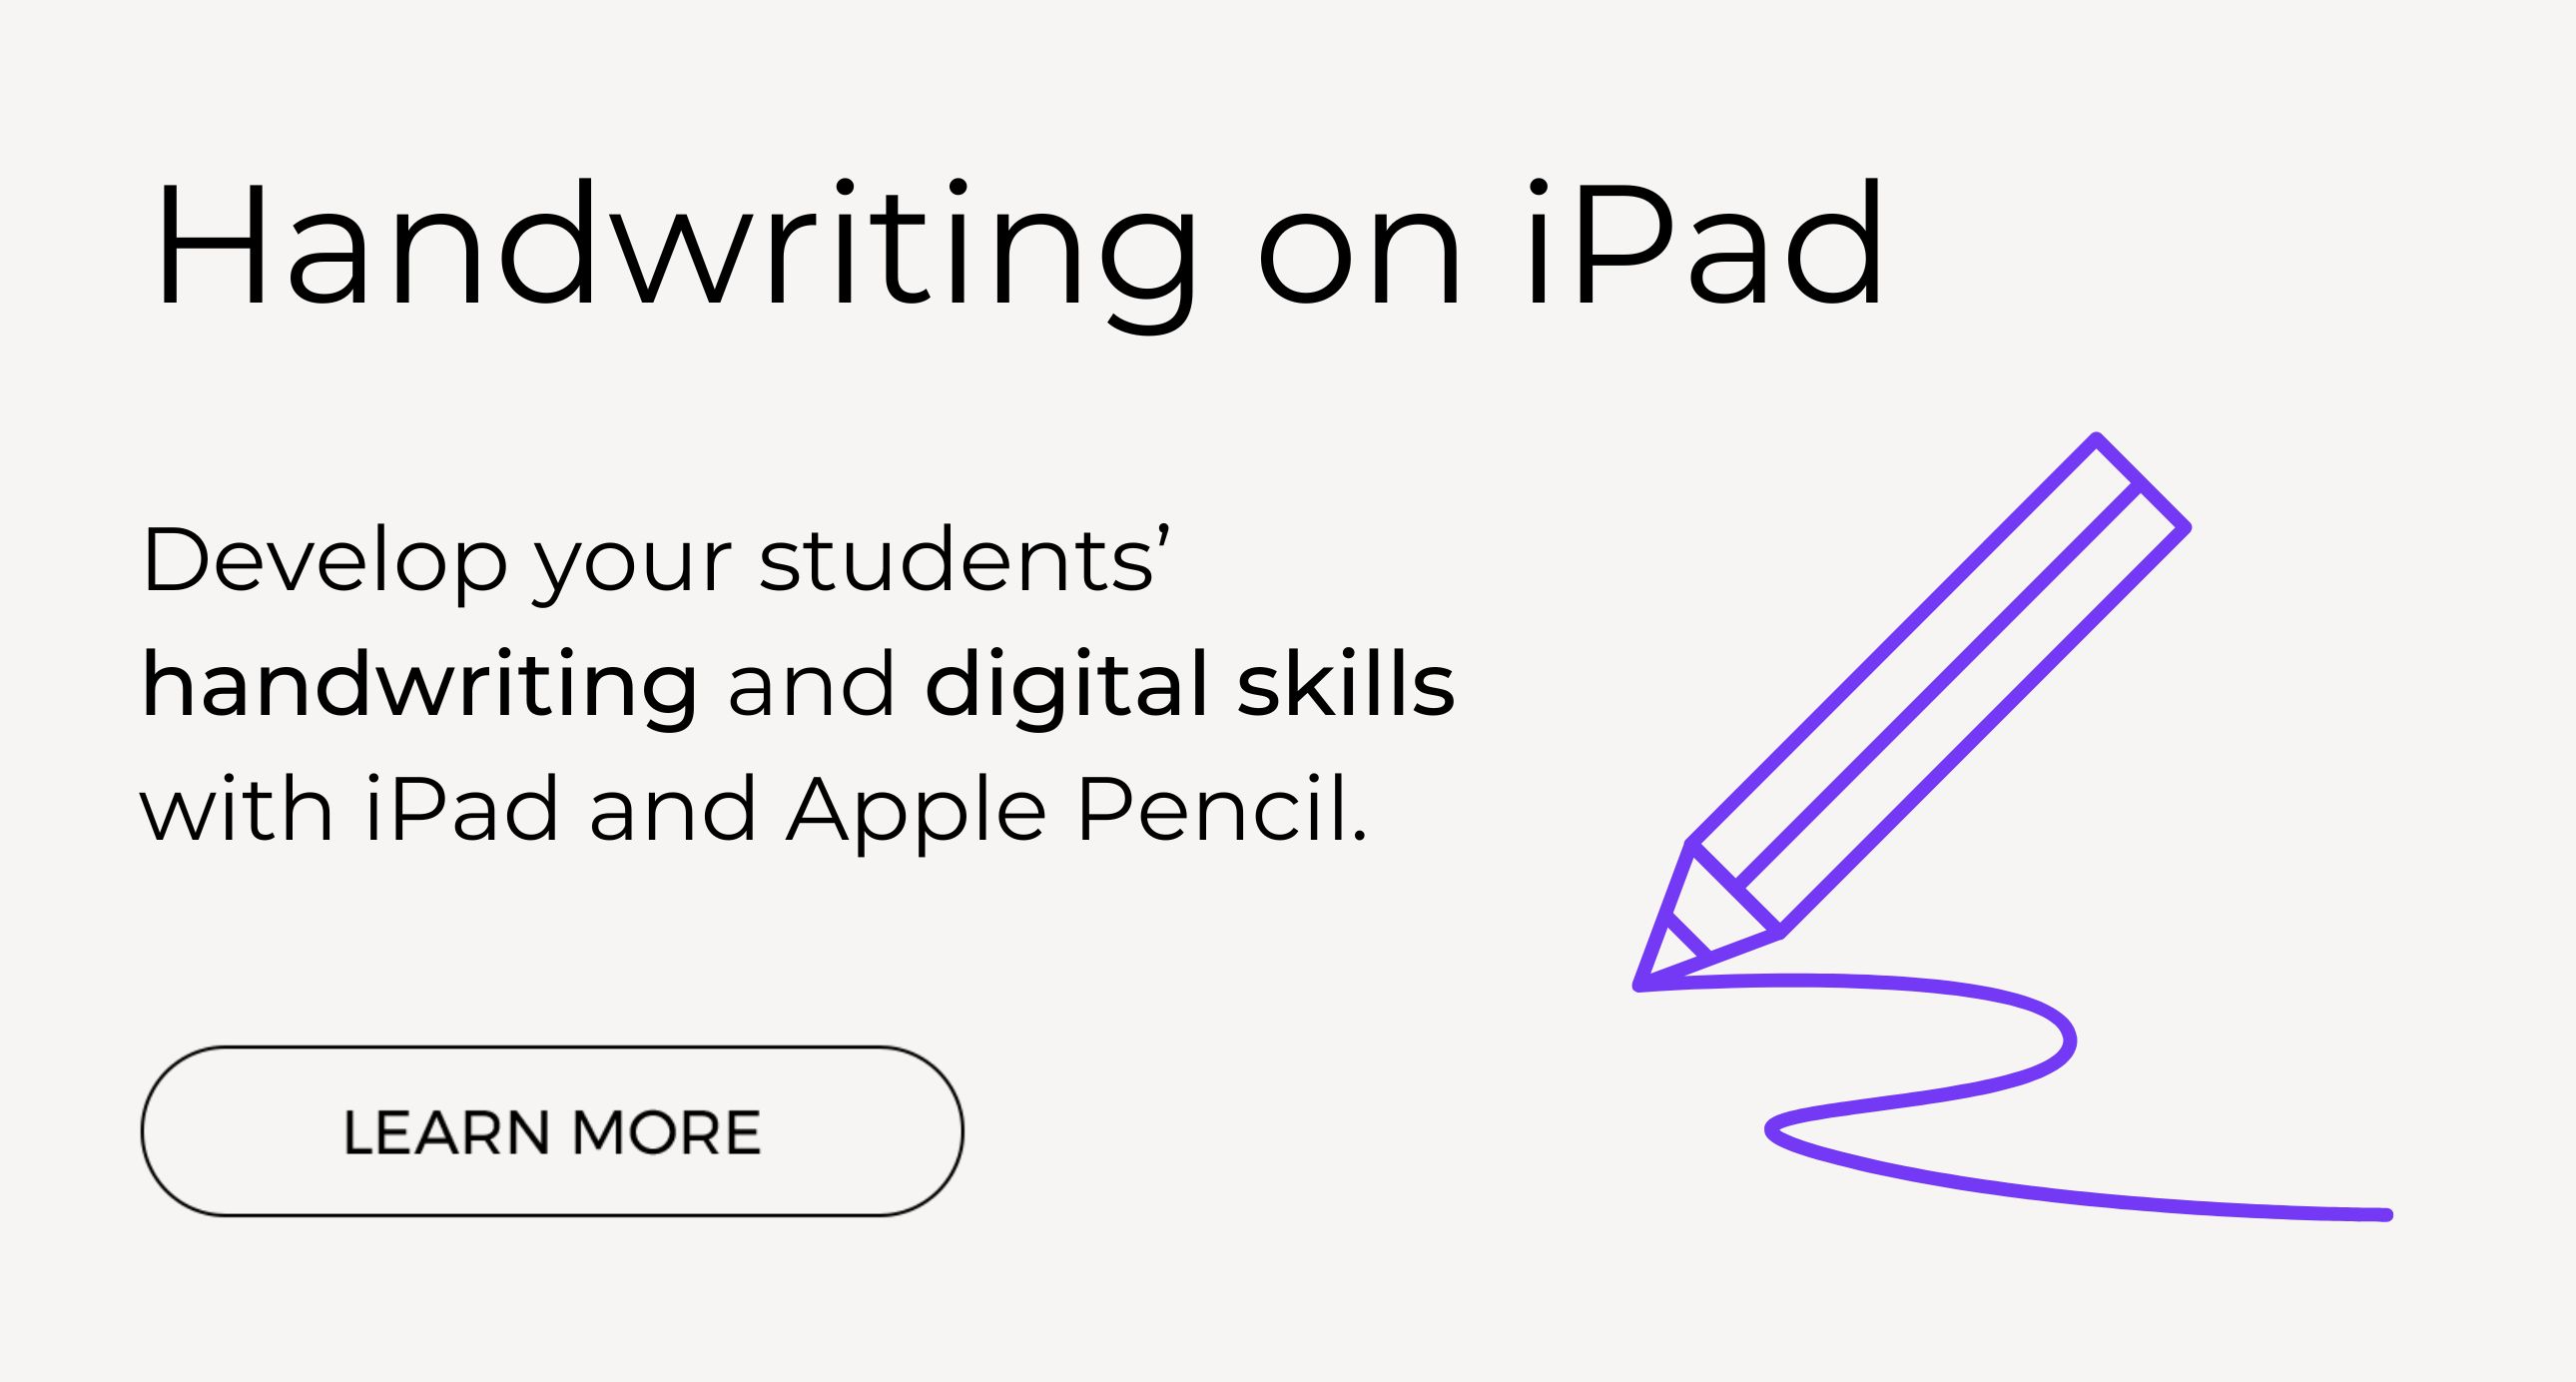 Handwriting on iPad. Develop your students’ handwriting and digital skills with iPad and Apple Pencil. Click to learn more.